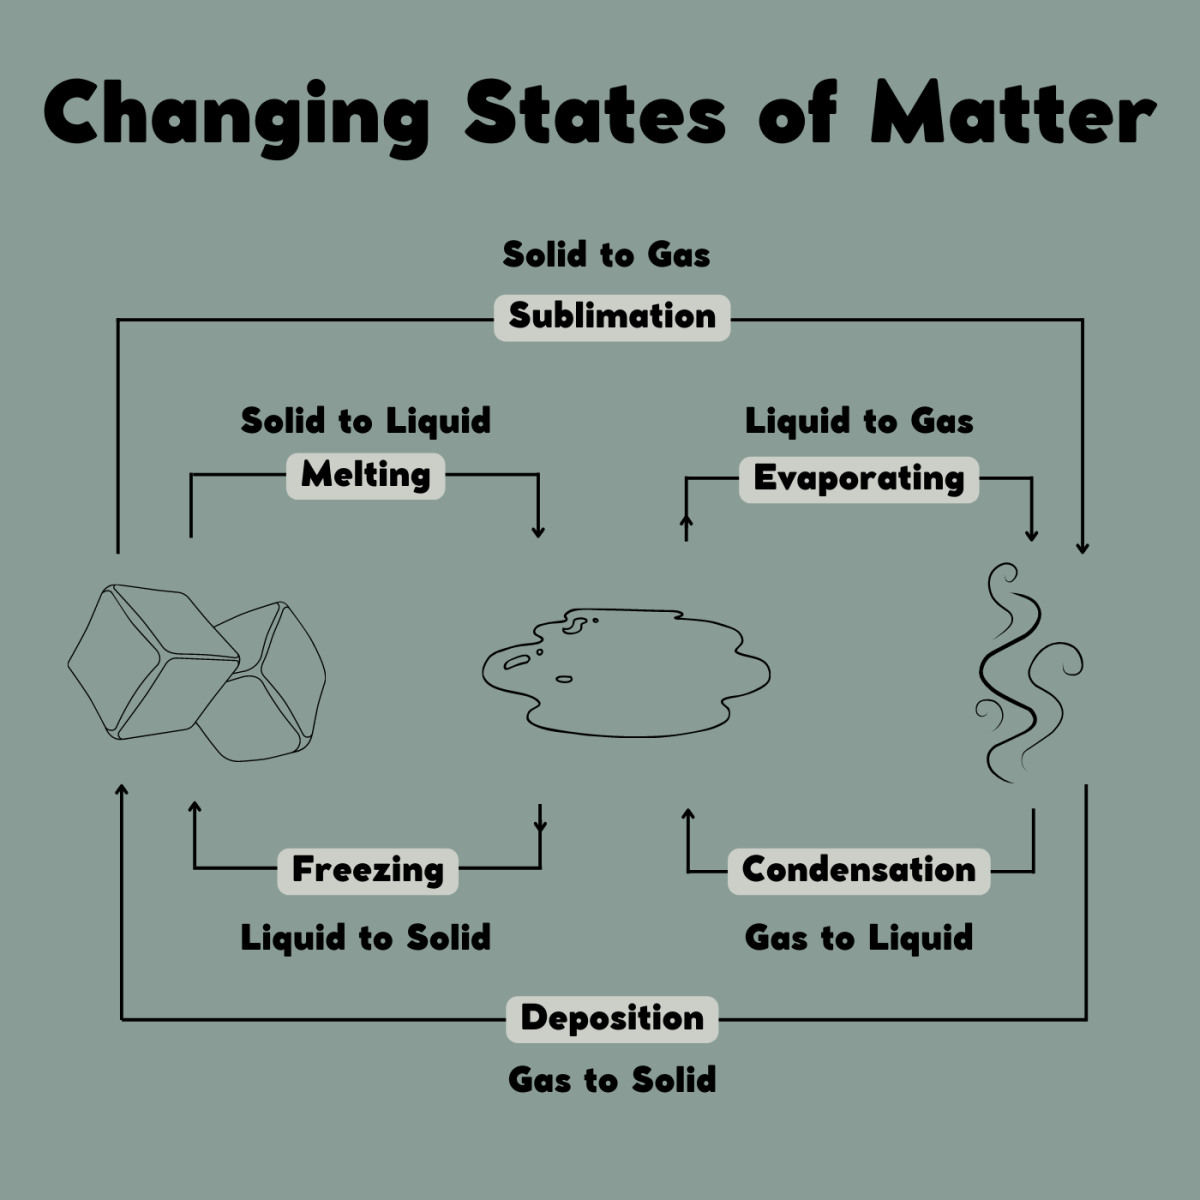 Graphic showing the changing states of matter